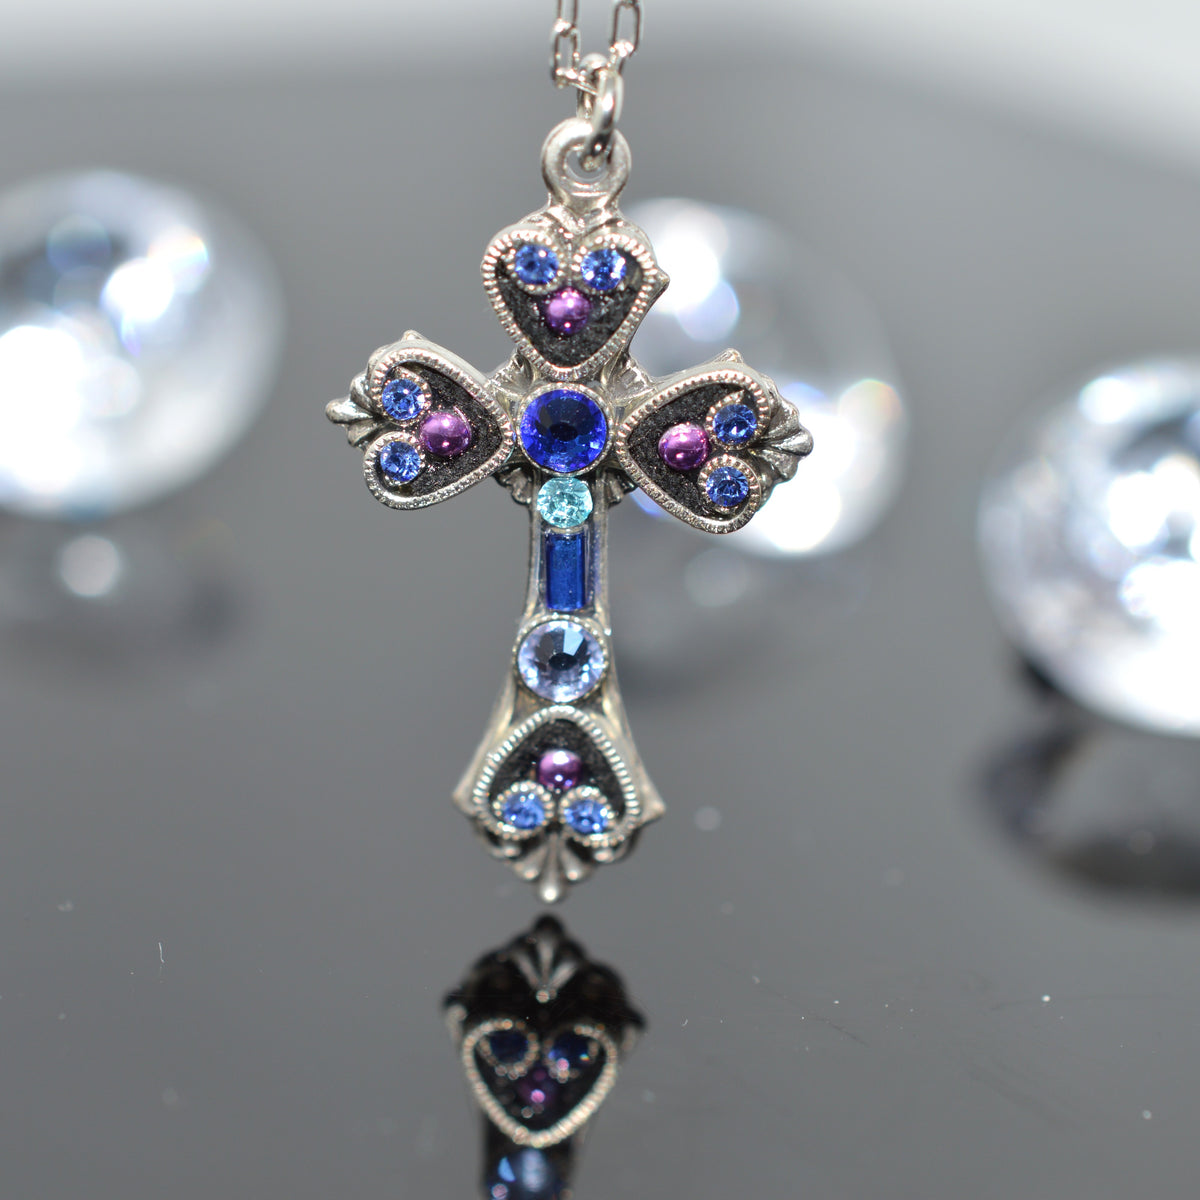 Antique Silver Plated Sapphire Crystal Cross Pendant by Firefly